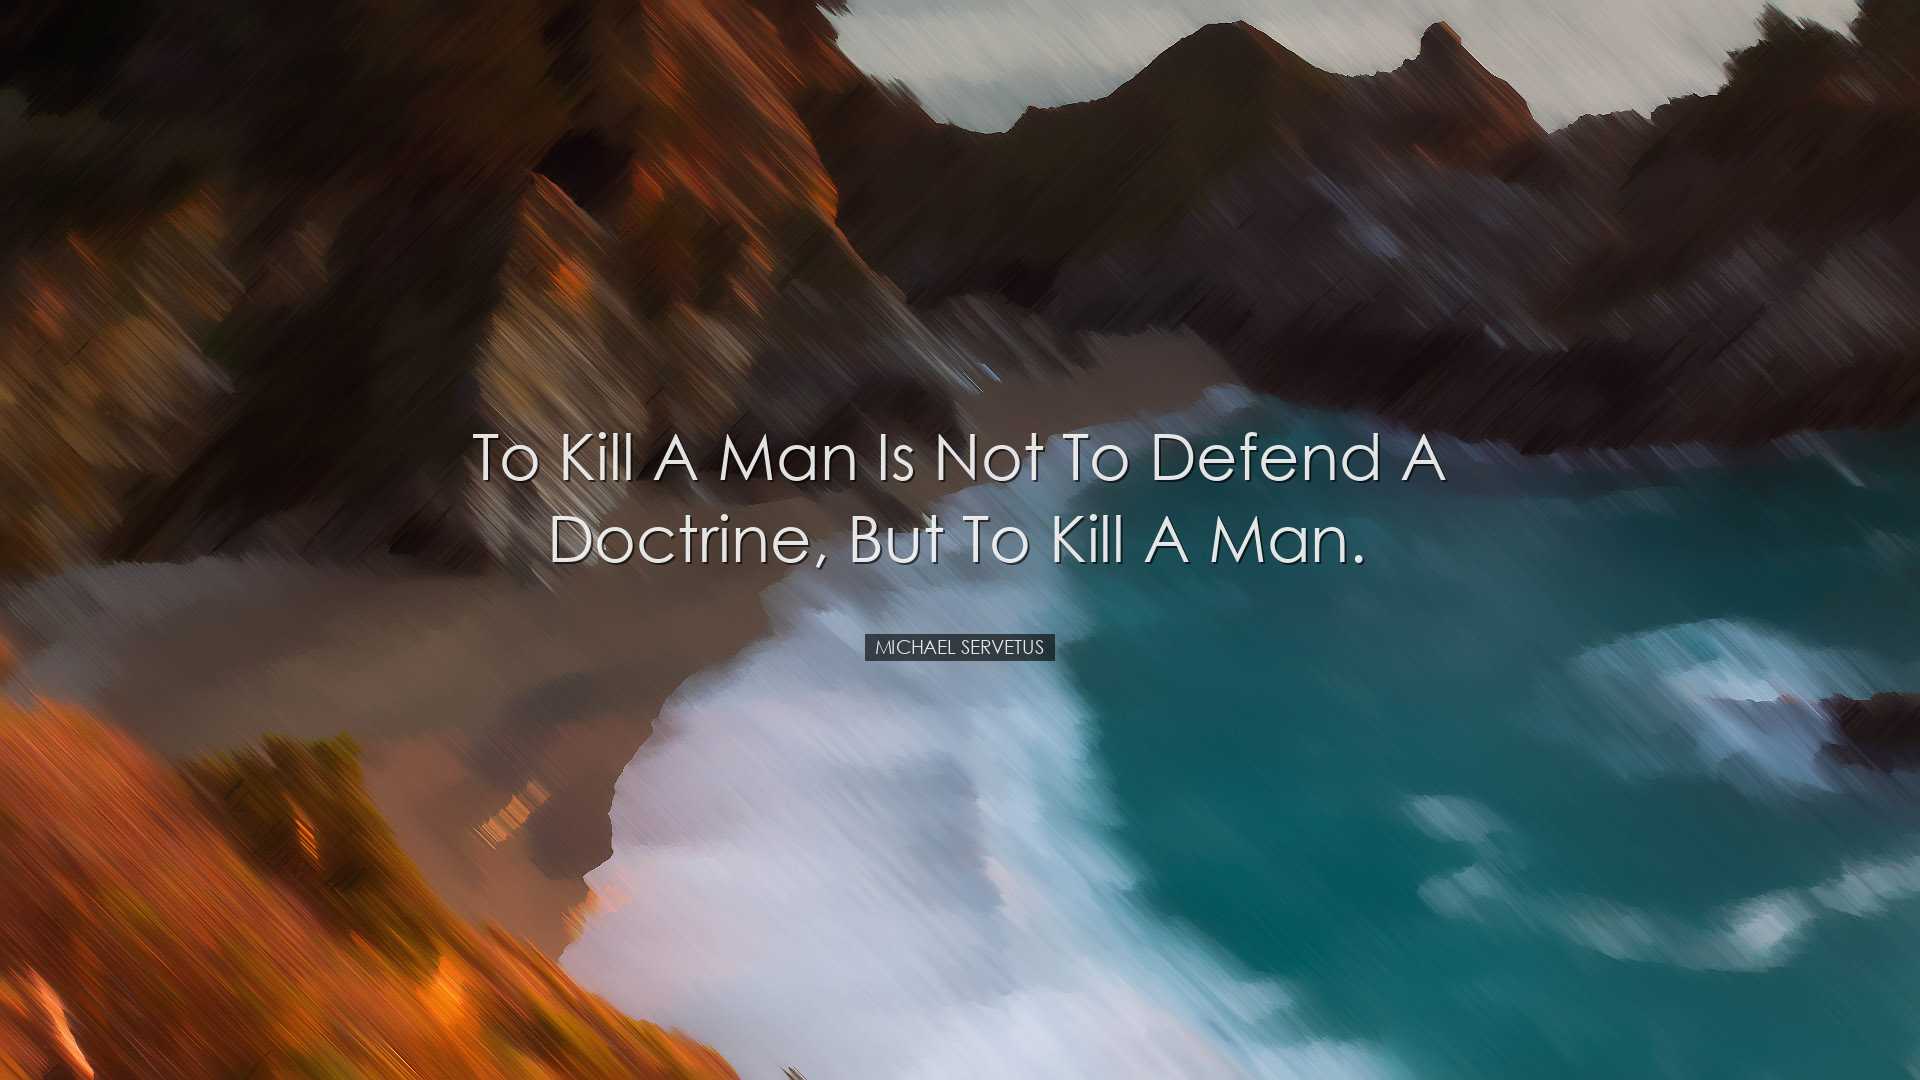 To kill a man is not to defend a doctrine, but to kill a man. - Mi